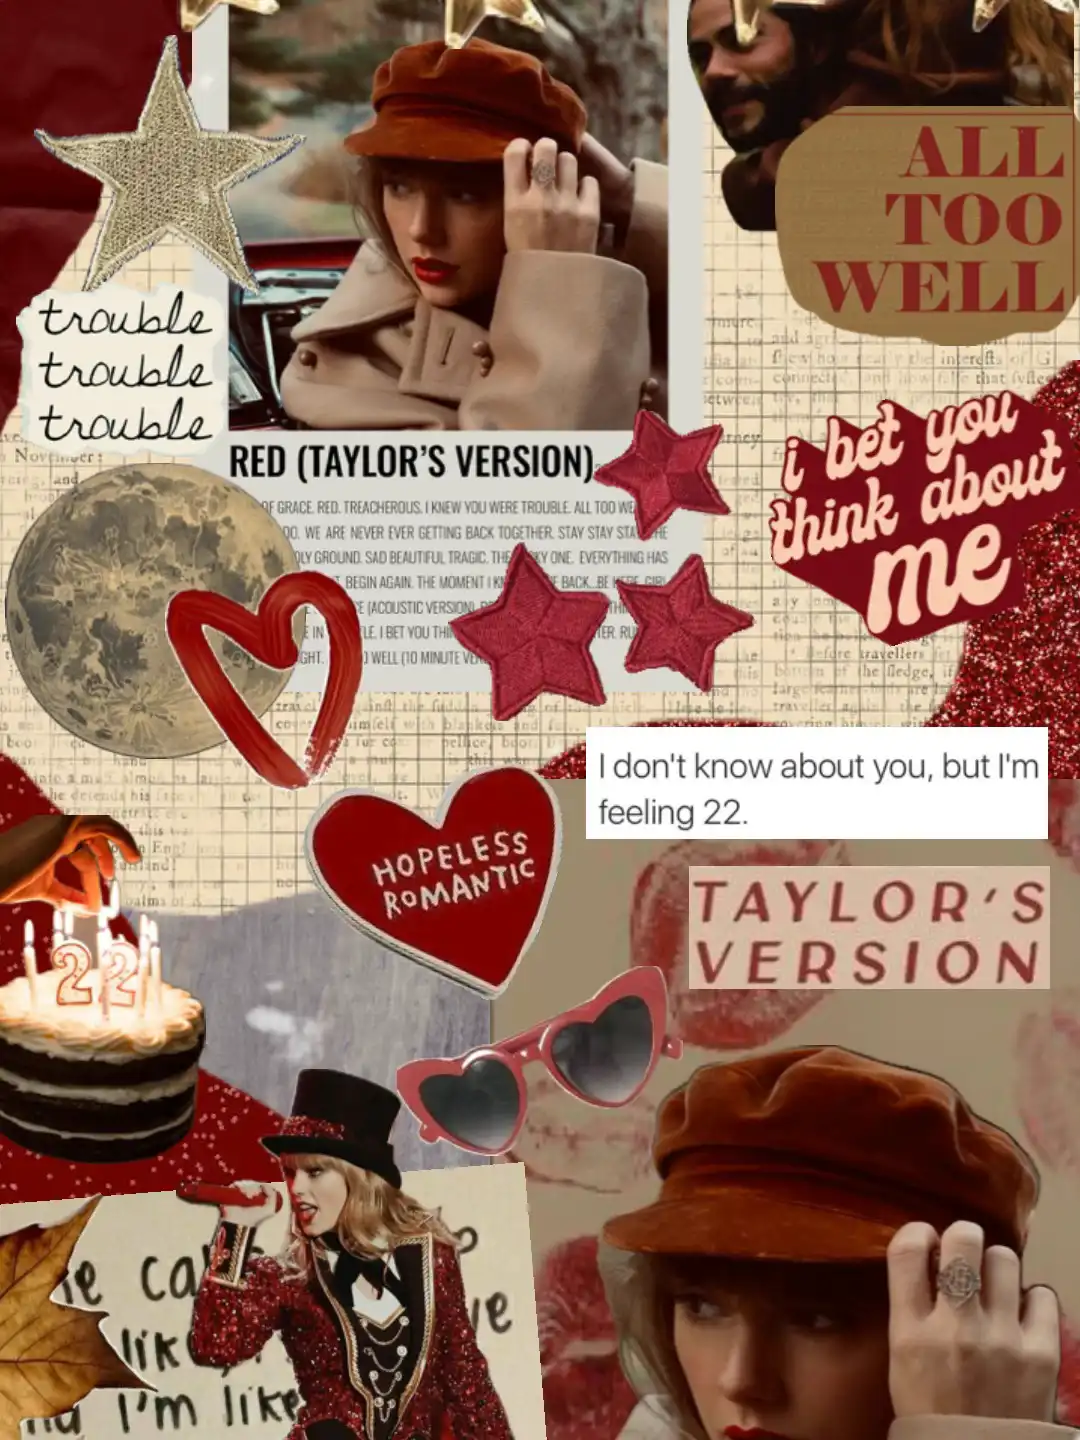 A collage of Taylor Swift's Red album cover, lyrics, and other images. - Taylor Swift